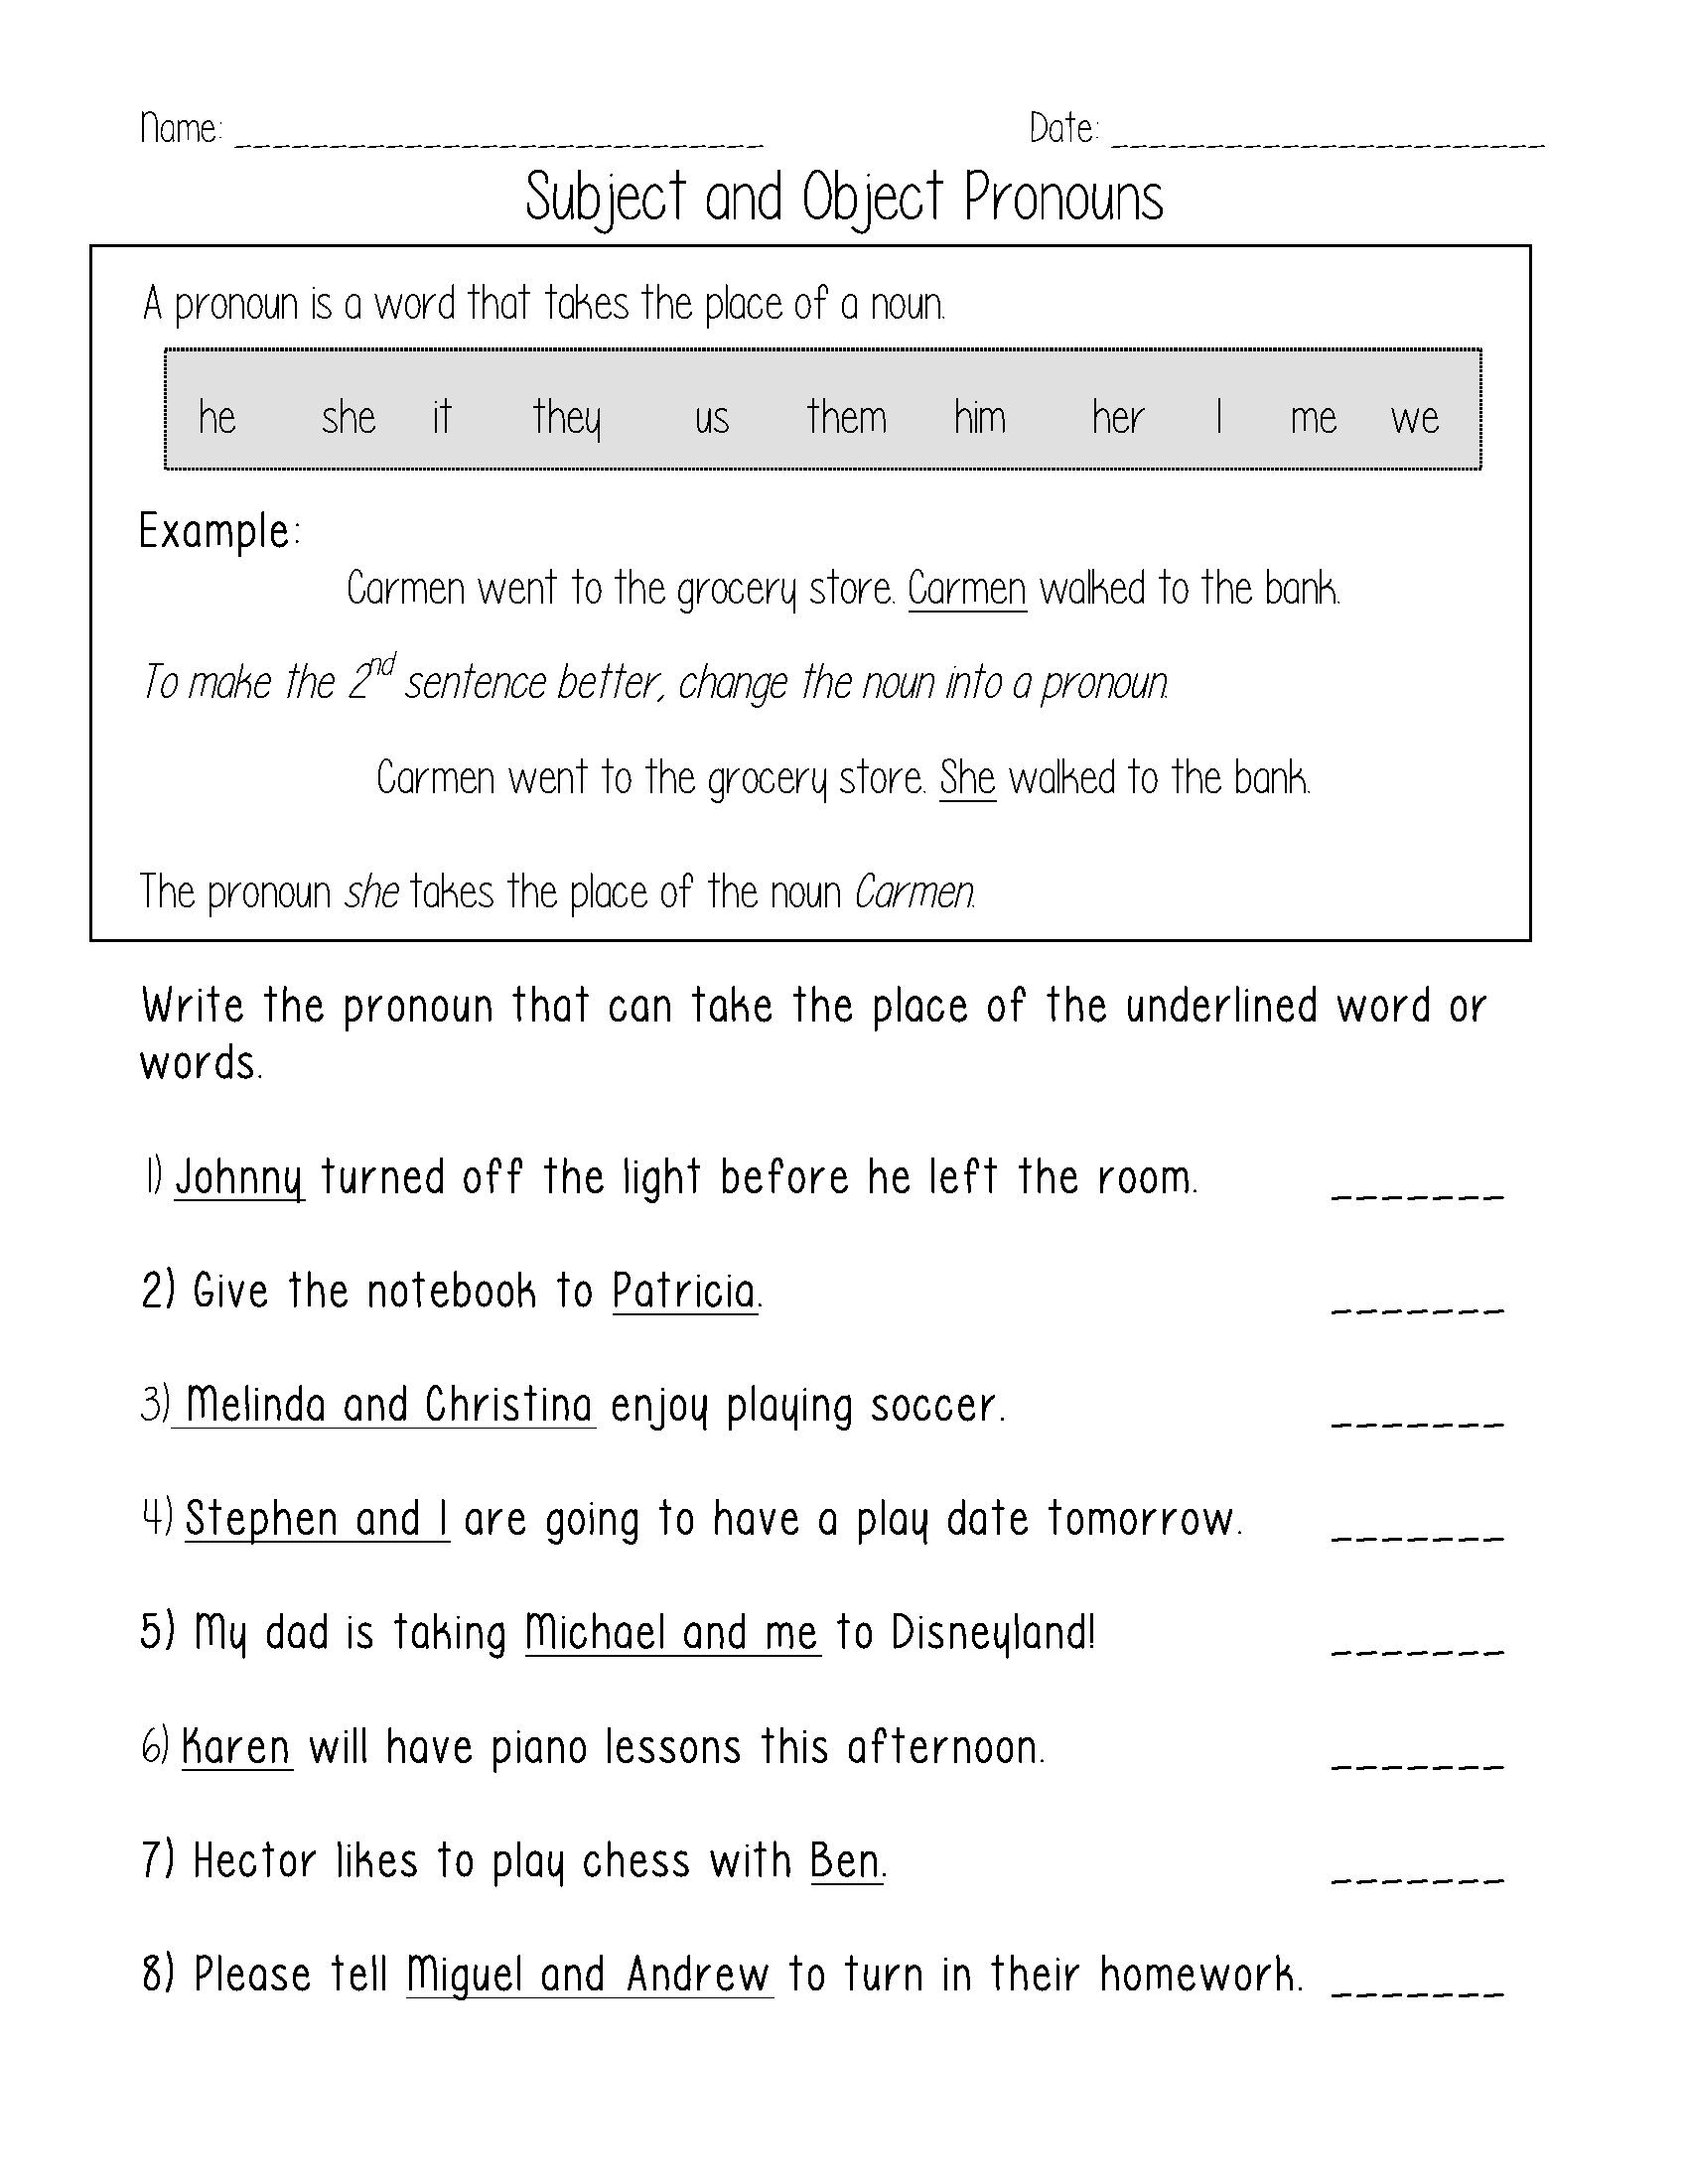 30-subject-pronouns-in-spanish-worksheet-education-template